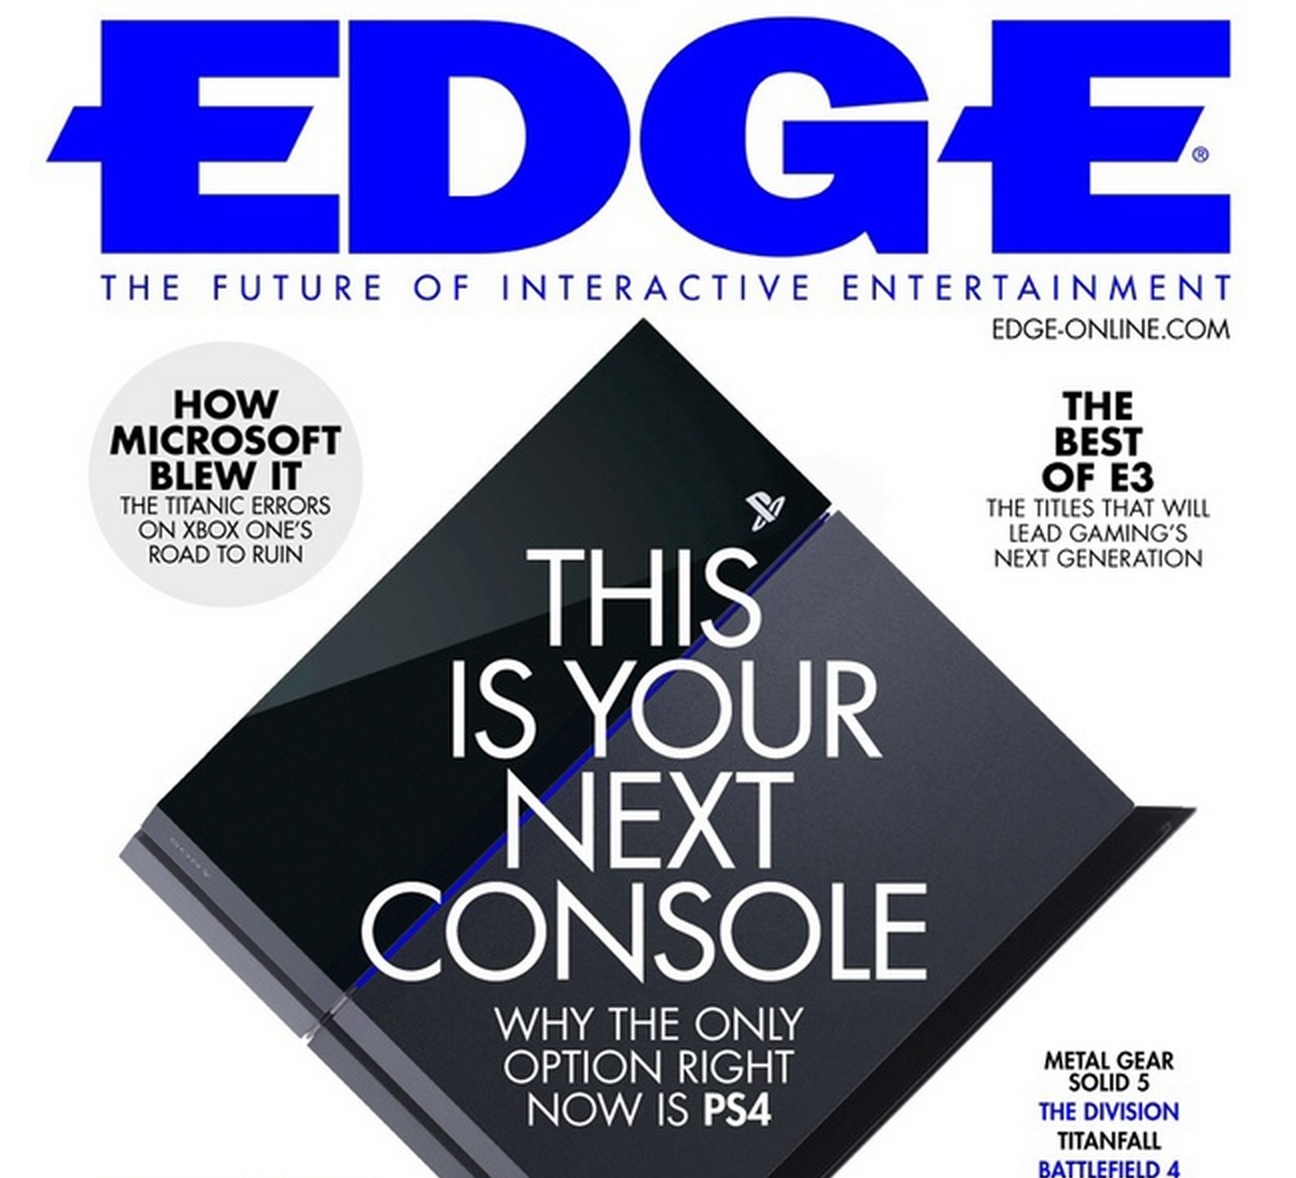 Popular gaming magazine tells to choose PS4 over Xbox One | dotTech